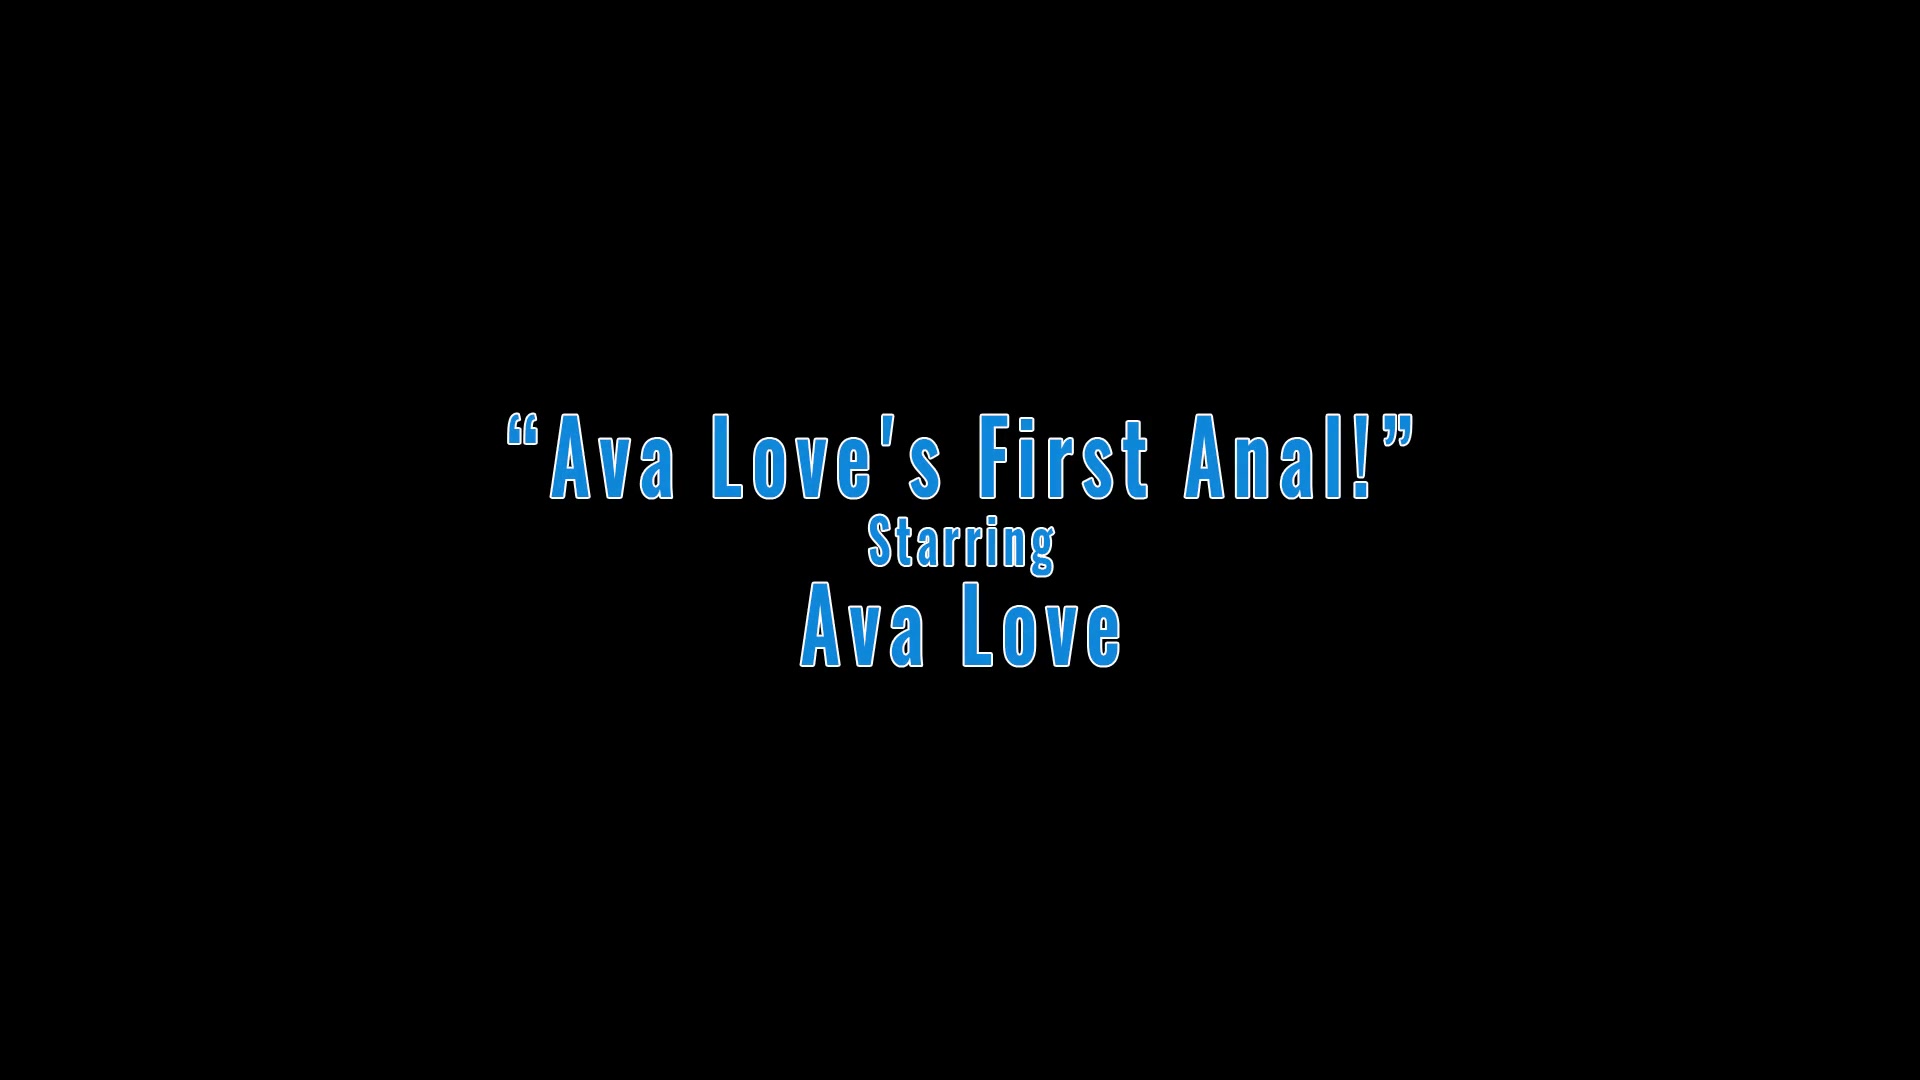 Ava Loves First Anal!